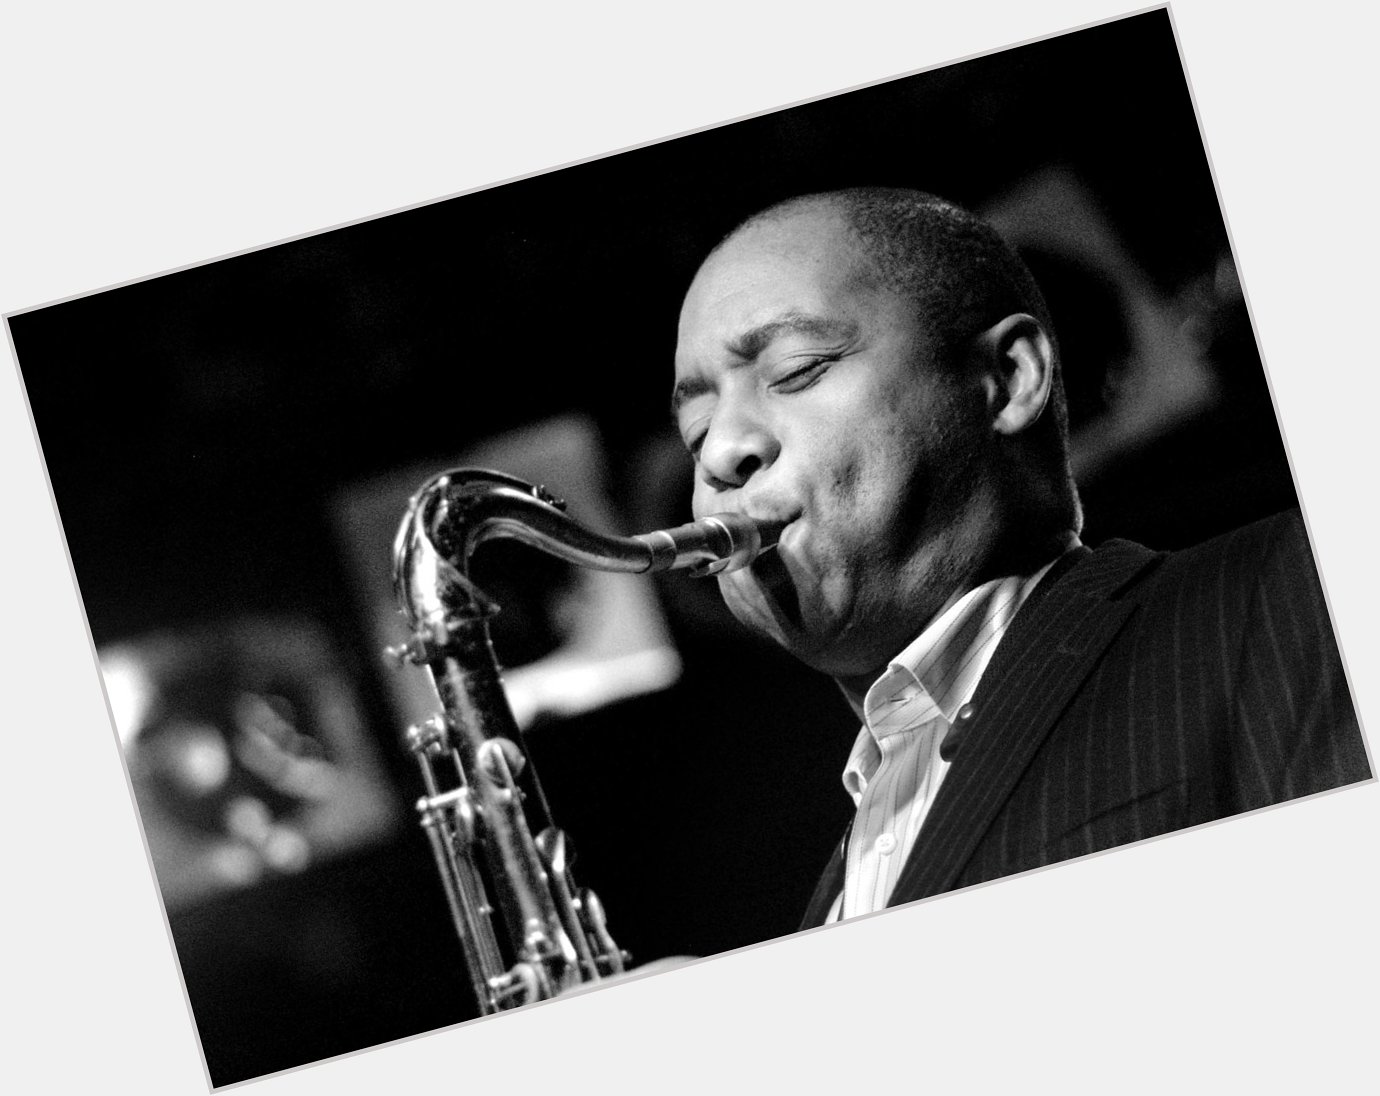 Happy Birthday, Branford Marsalis! One of the most revered instrumentalists of his time. 